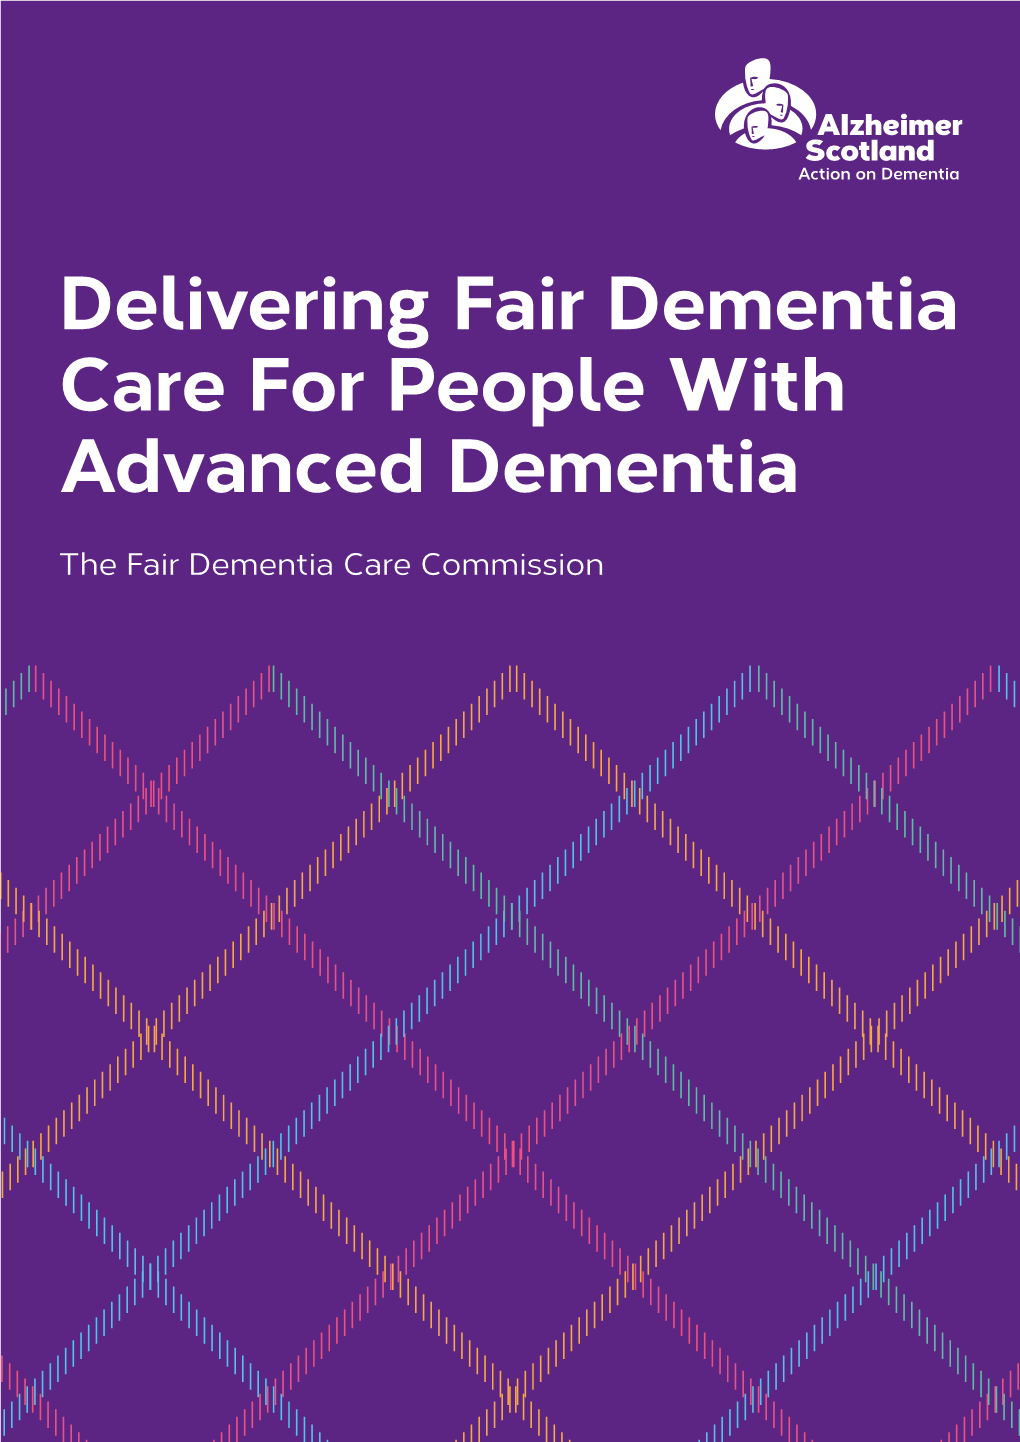 Delivering Fair Dementia Care for People with Advanced Dementia